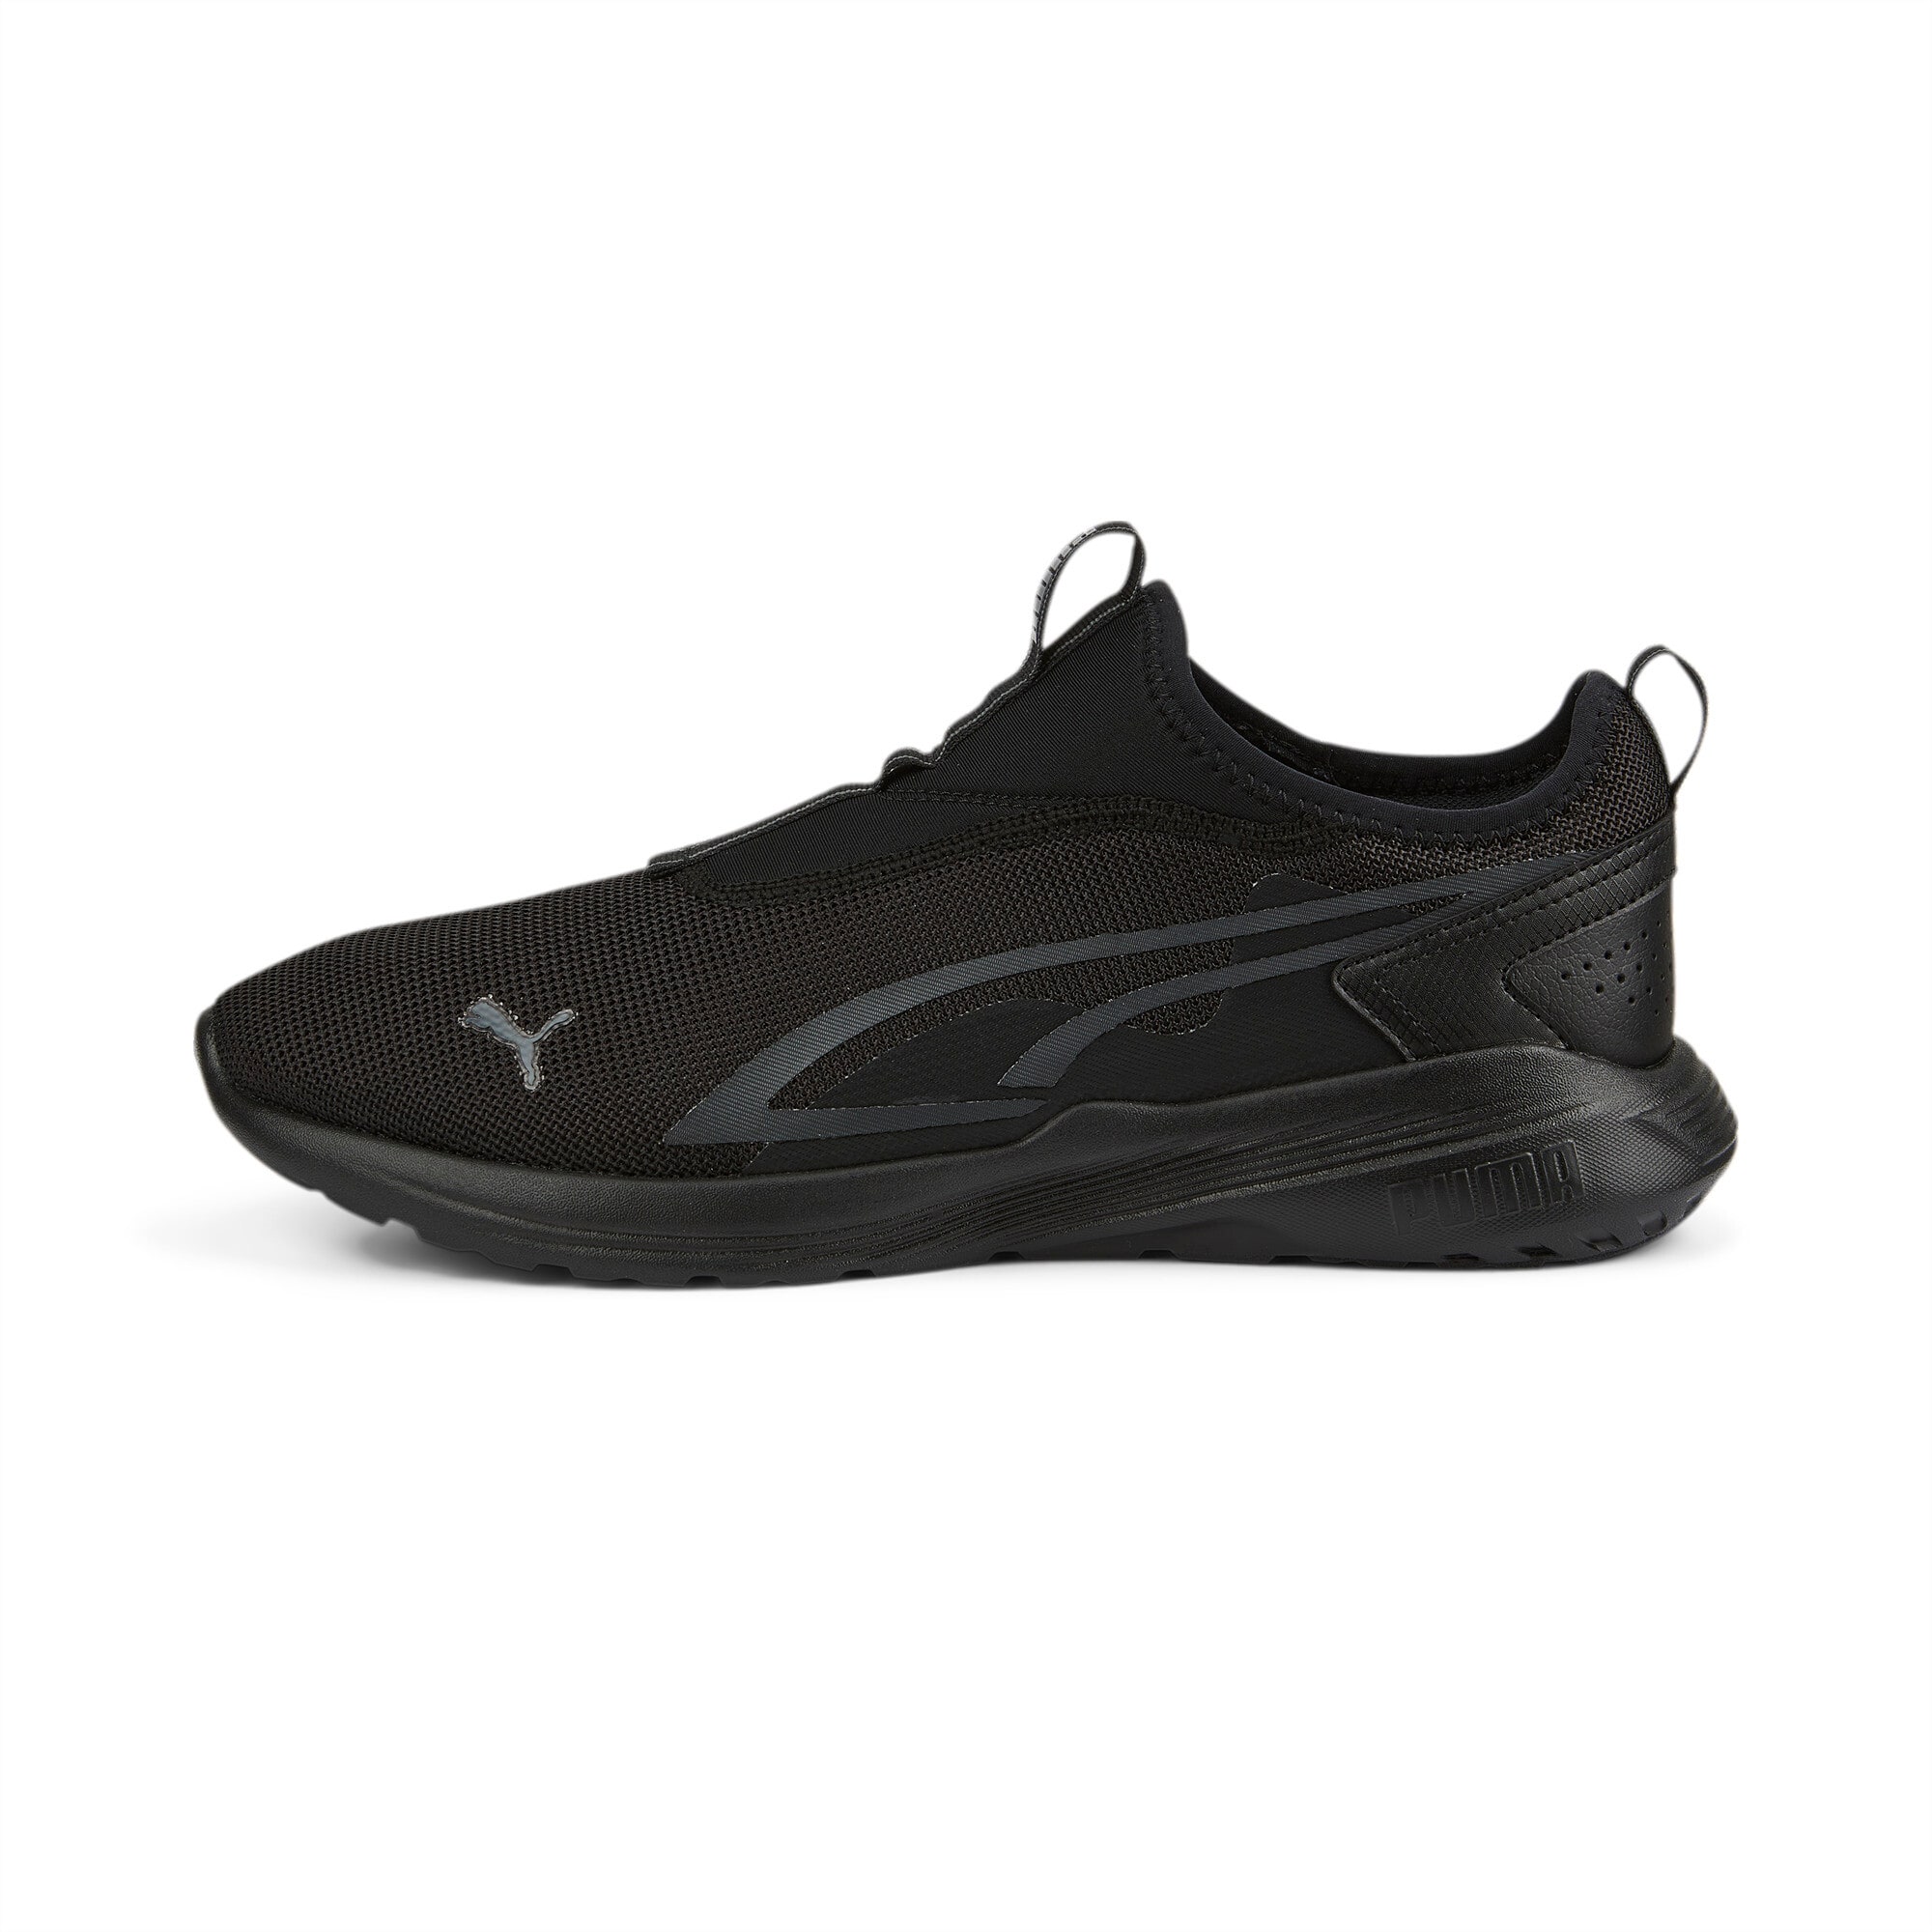 All-Day Active Slipon Unisex Sneakers | PUMA